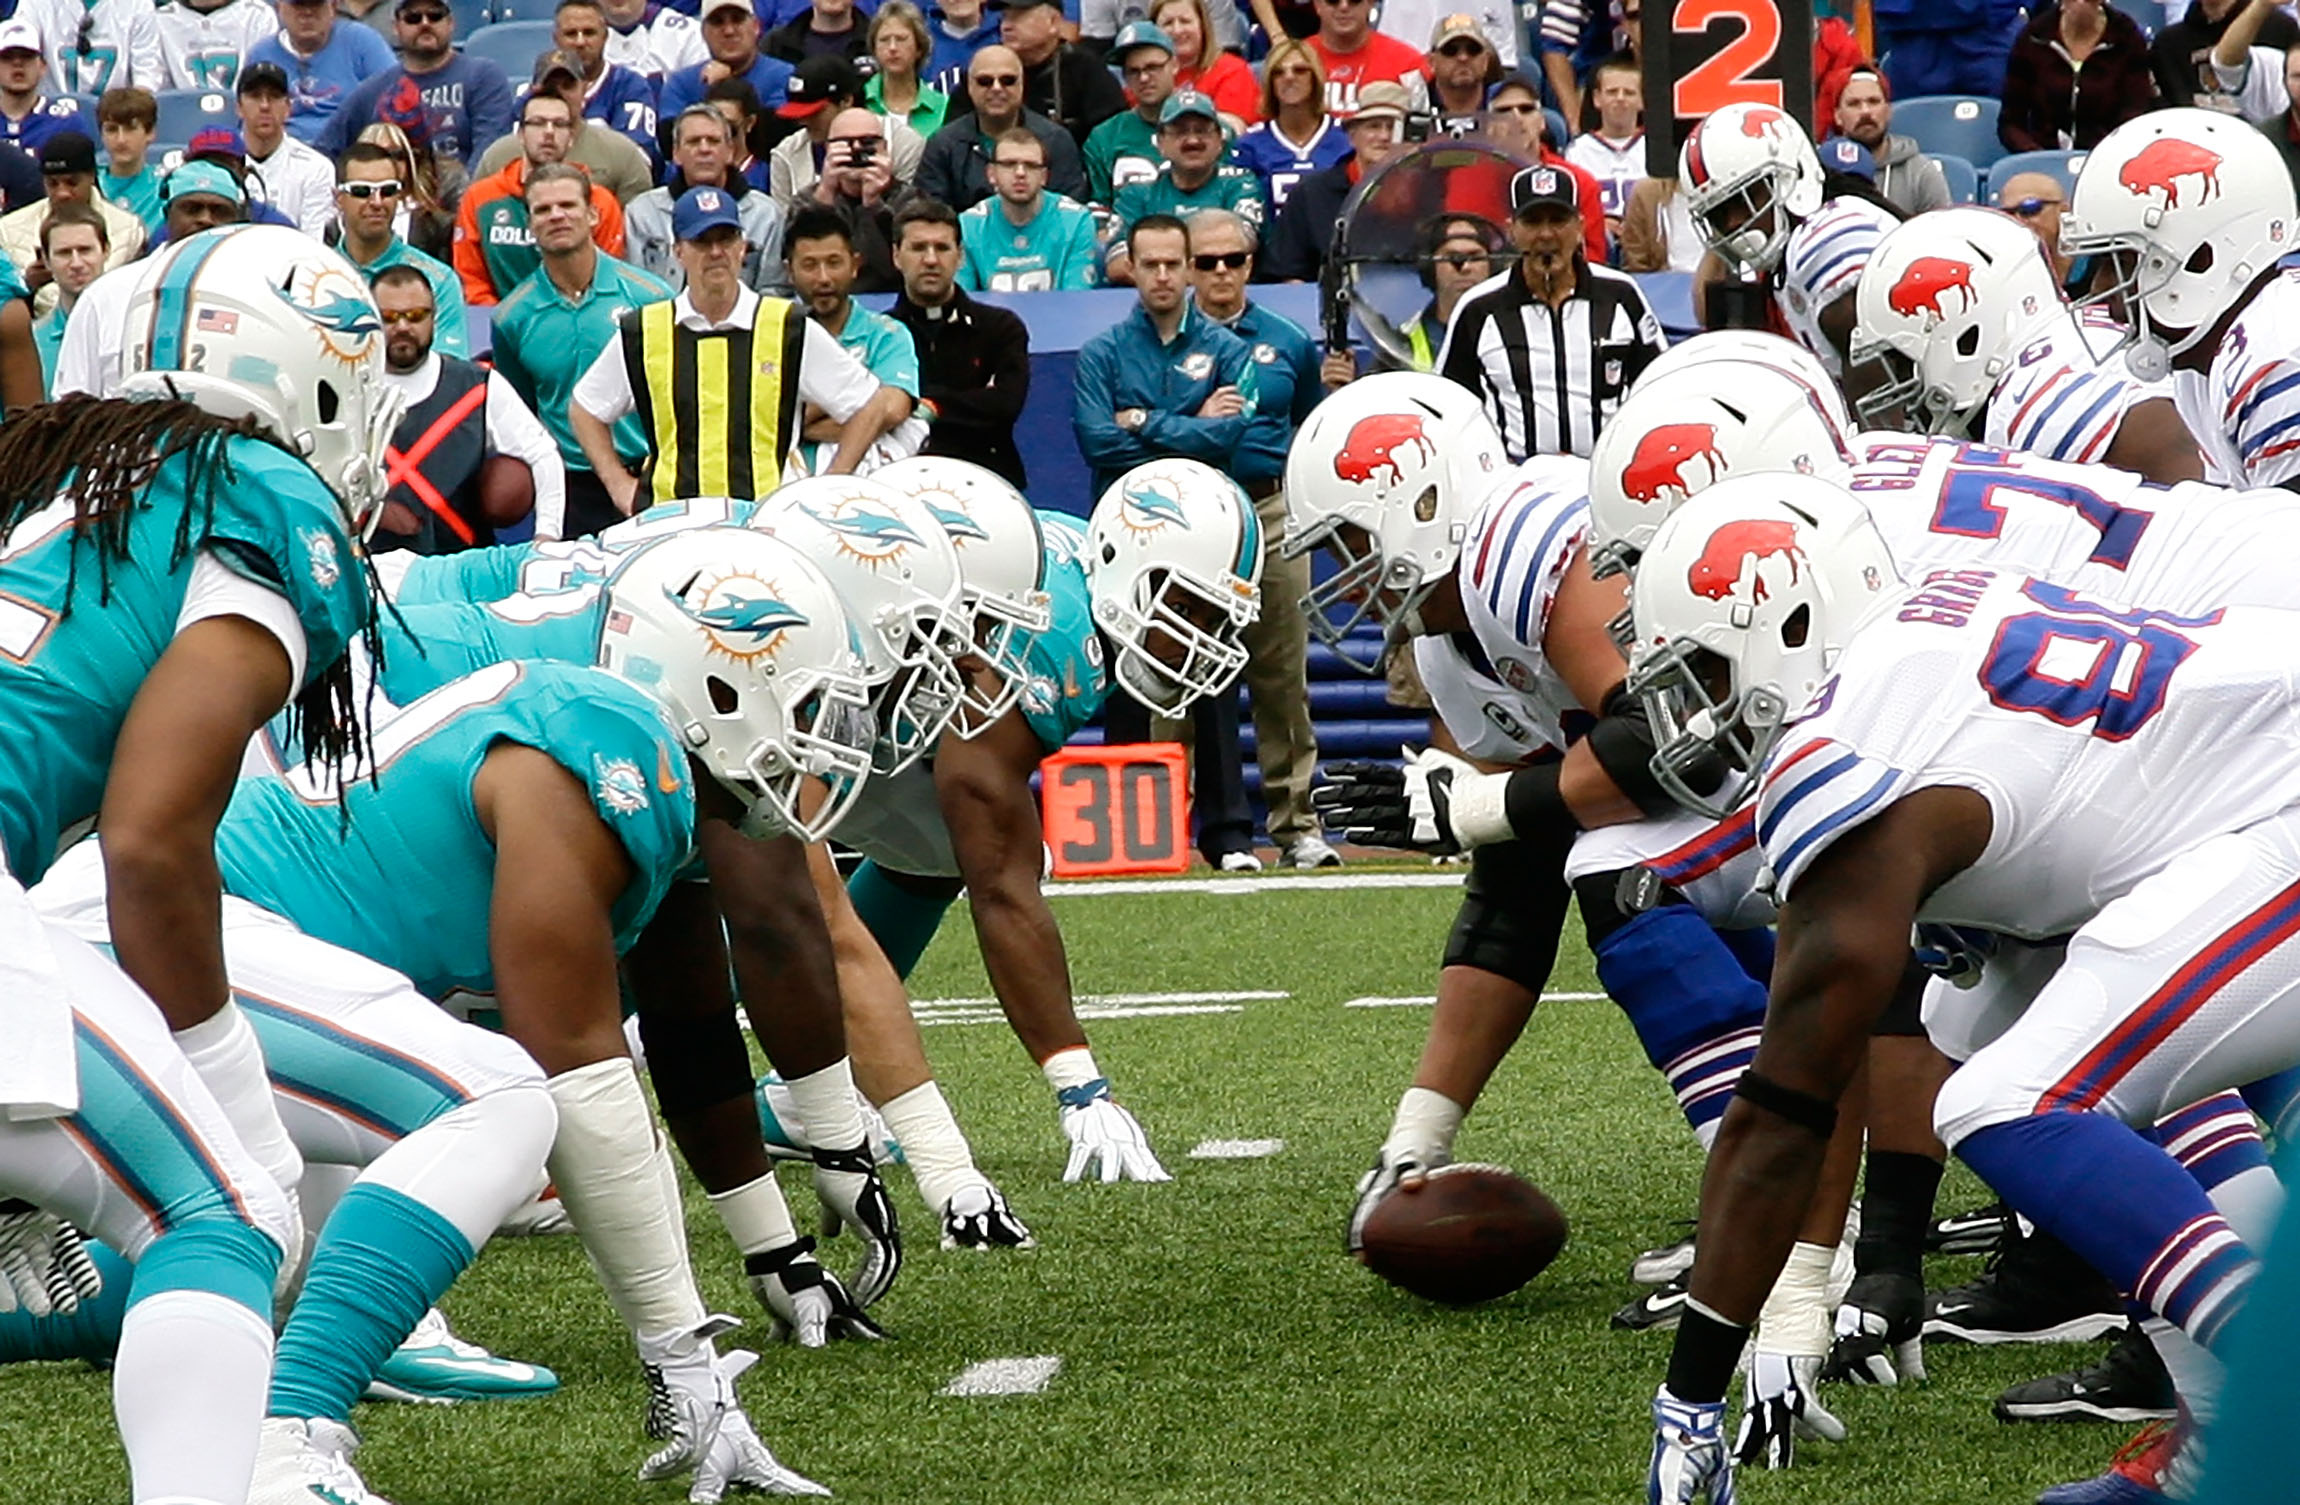 The Buffalo Bills square off against the Miami Dolphins during the first half at Ralph Wilson Stadium on September 14, 2014 in Orchard Park, New York.  (Source: Michael Adamucci/Getty Images)